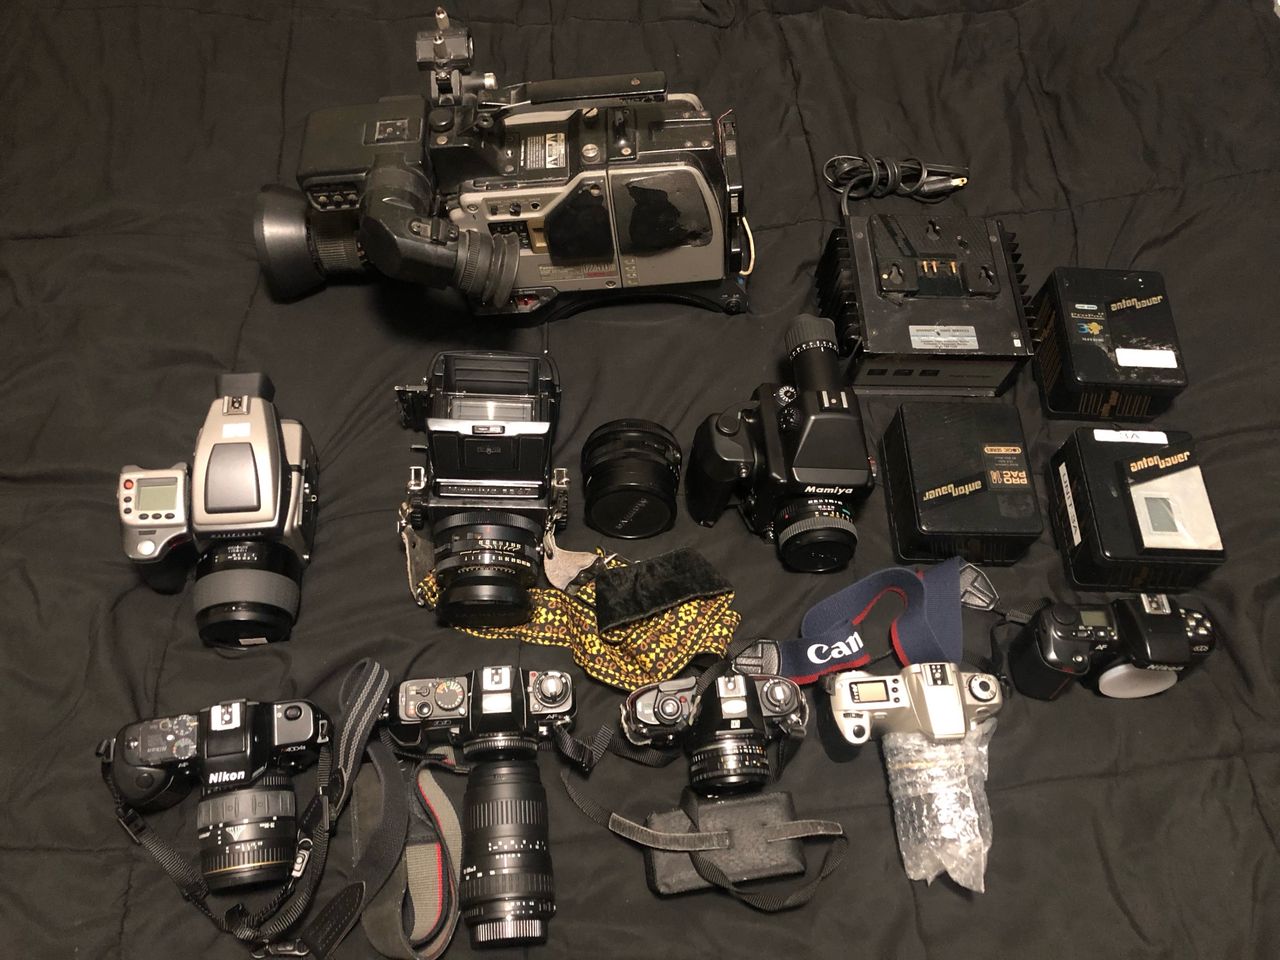 Omolayole’s camera collection displayed on his bed